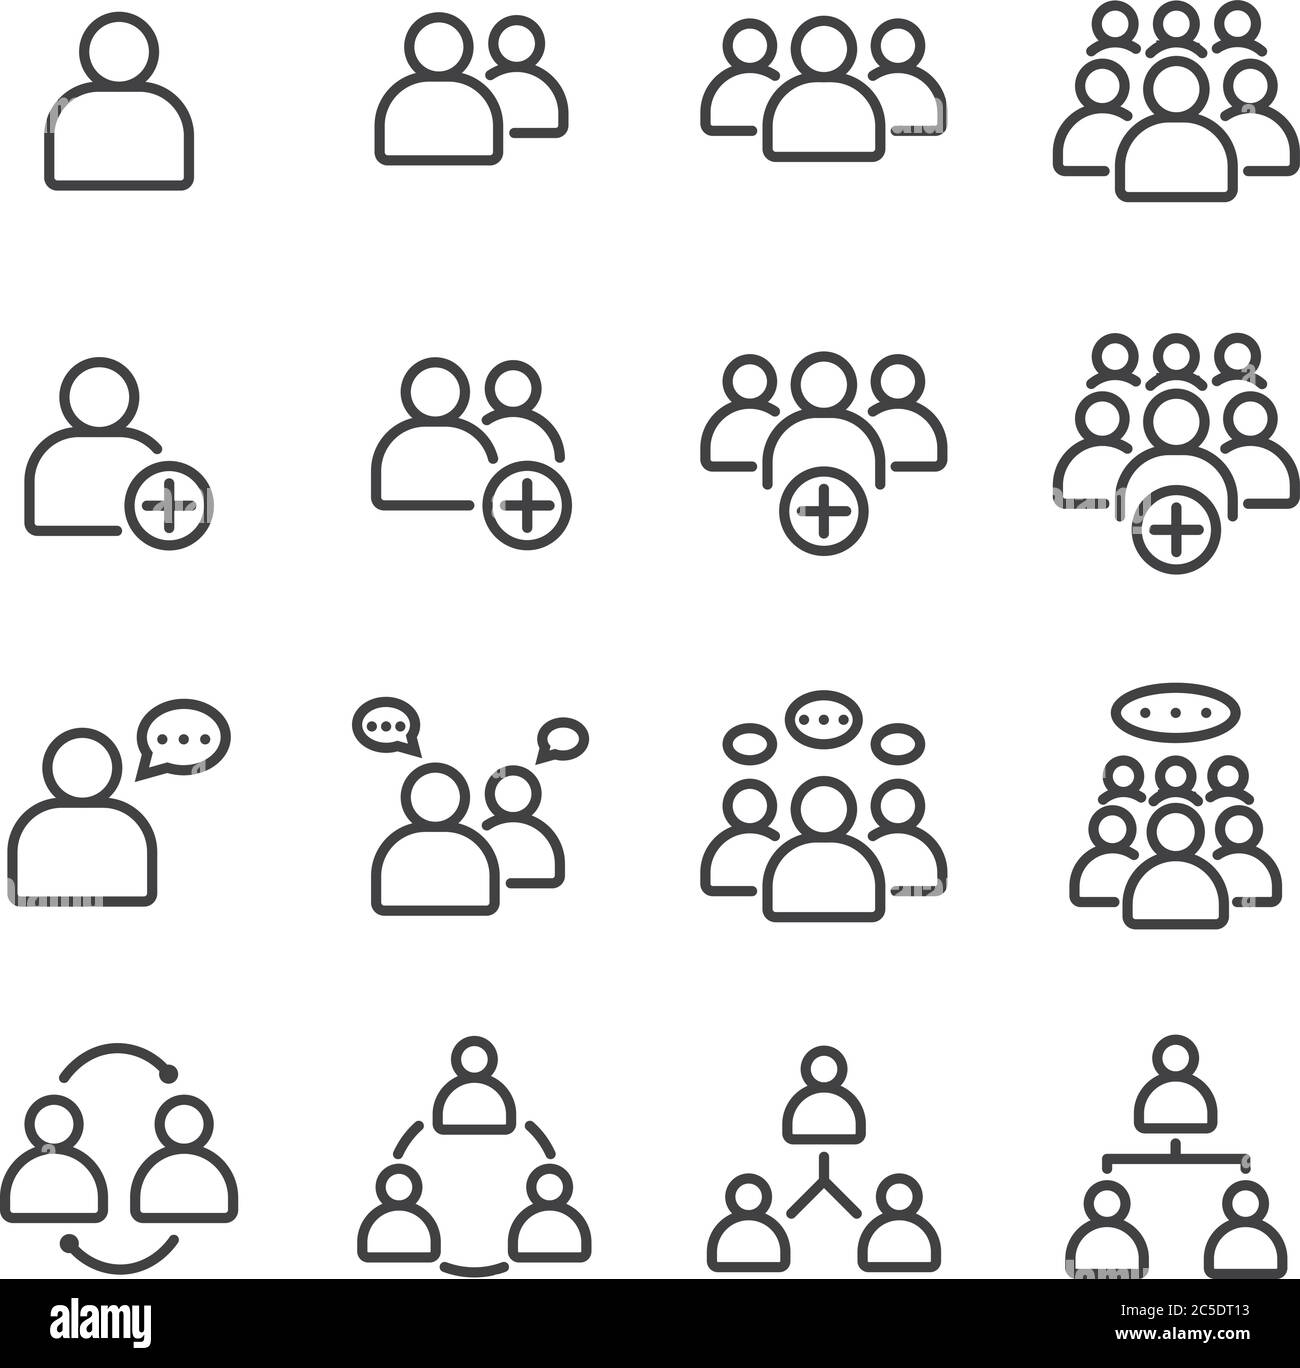 Simple Set of Business People Related Vector flat outline Icons. Contains such as Meeting, Business Communication, Teamwork, connection, speaking and Stock Vector